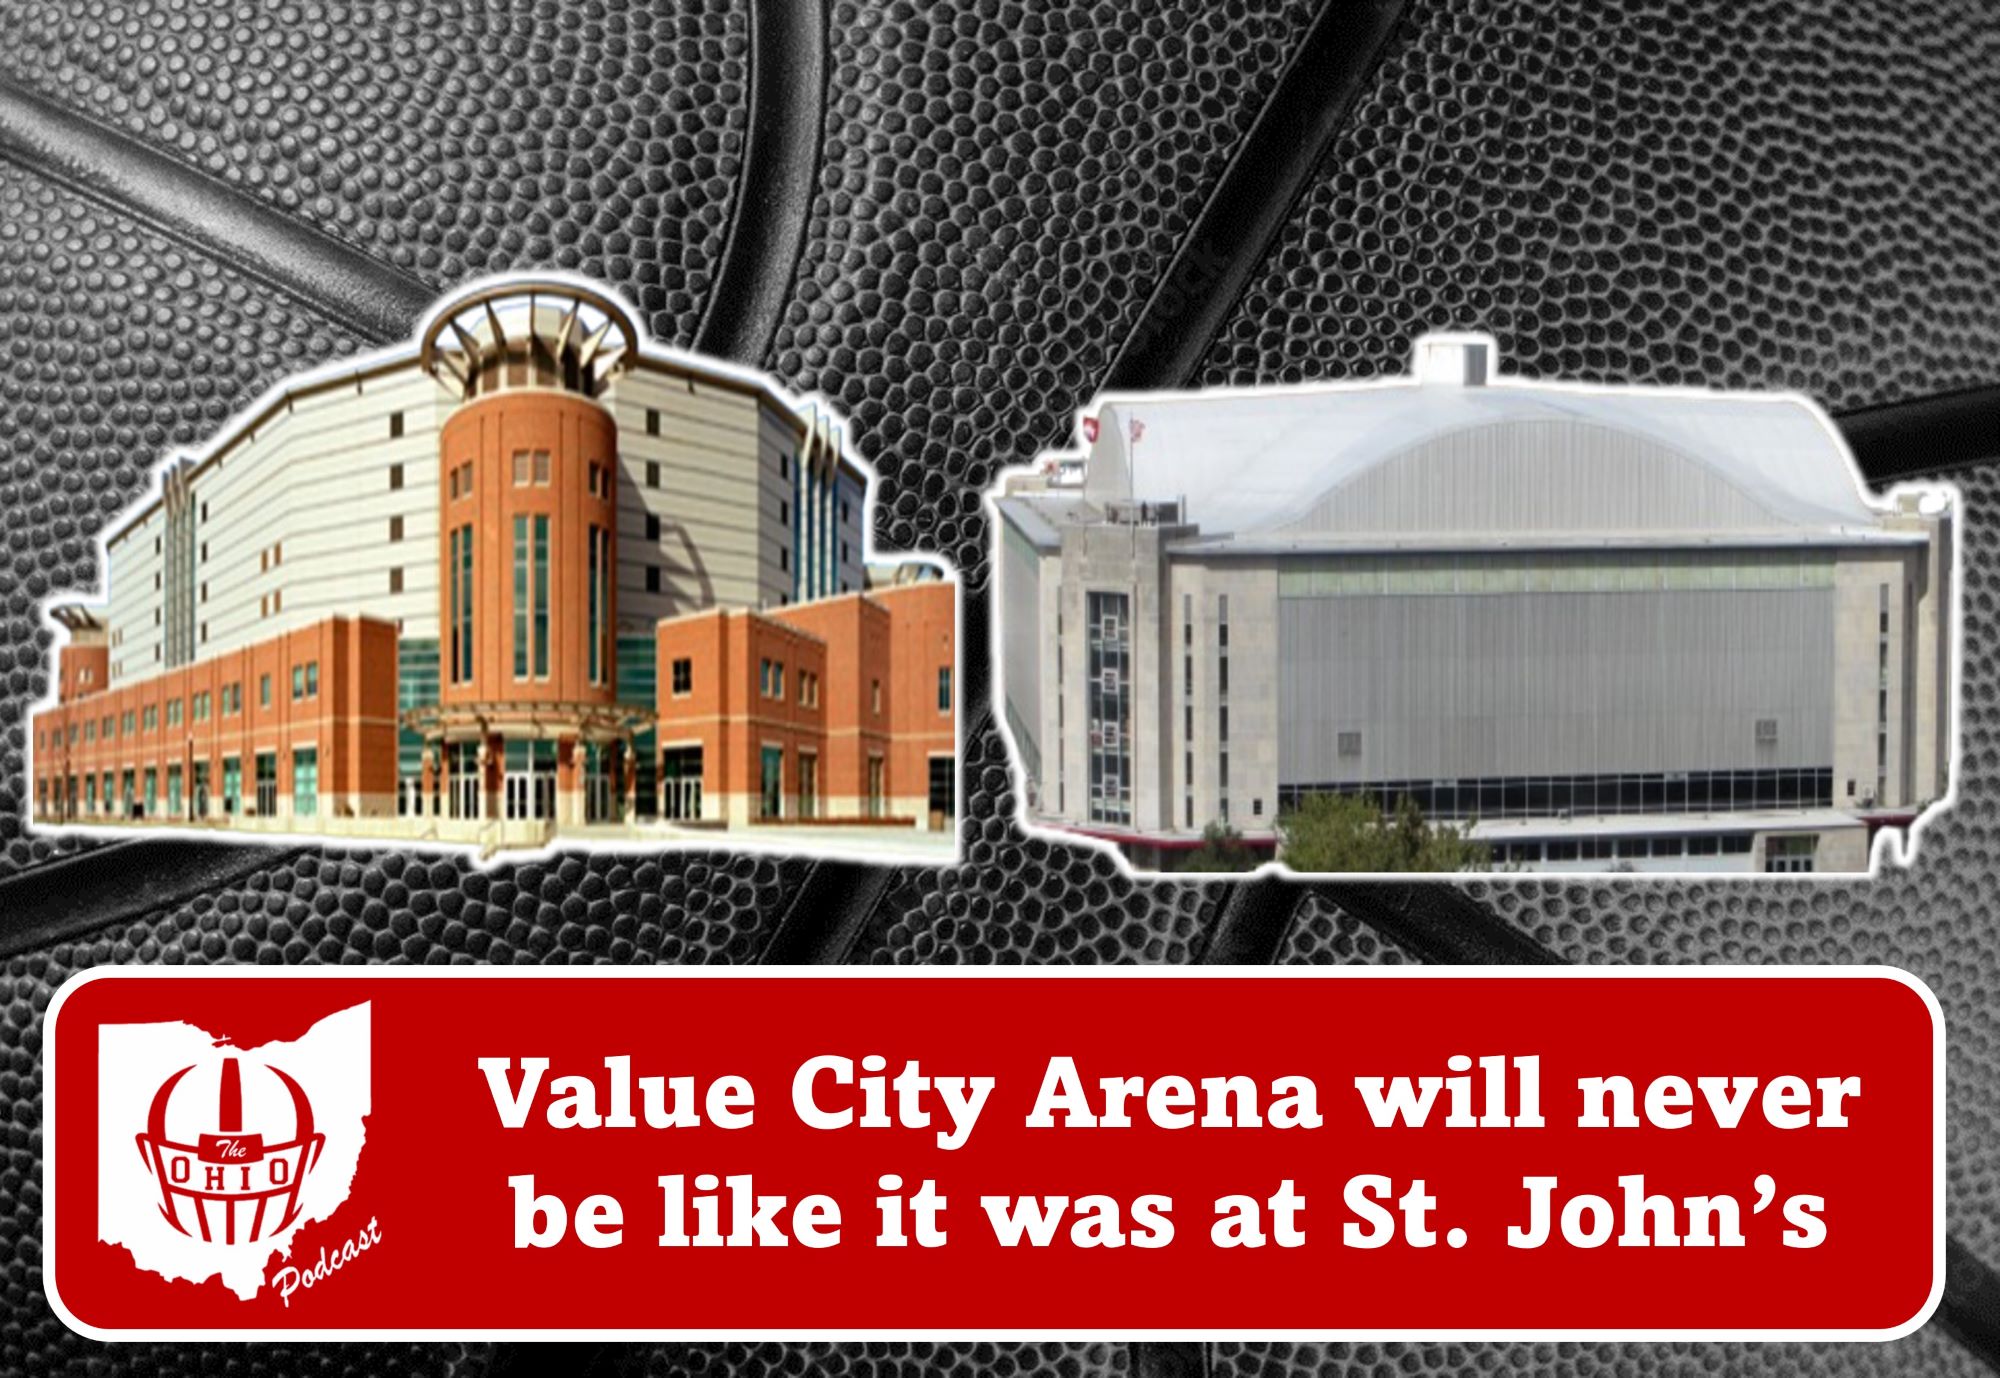 The Tale of Two Arenas: How Value City Falters in Capturing Ohio State’s Basketball Glory